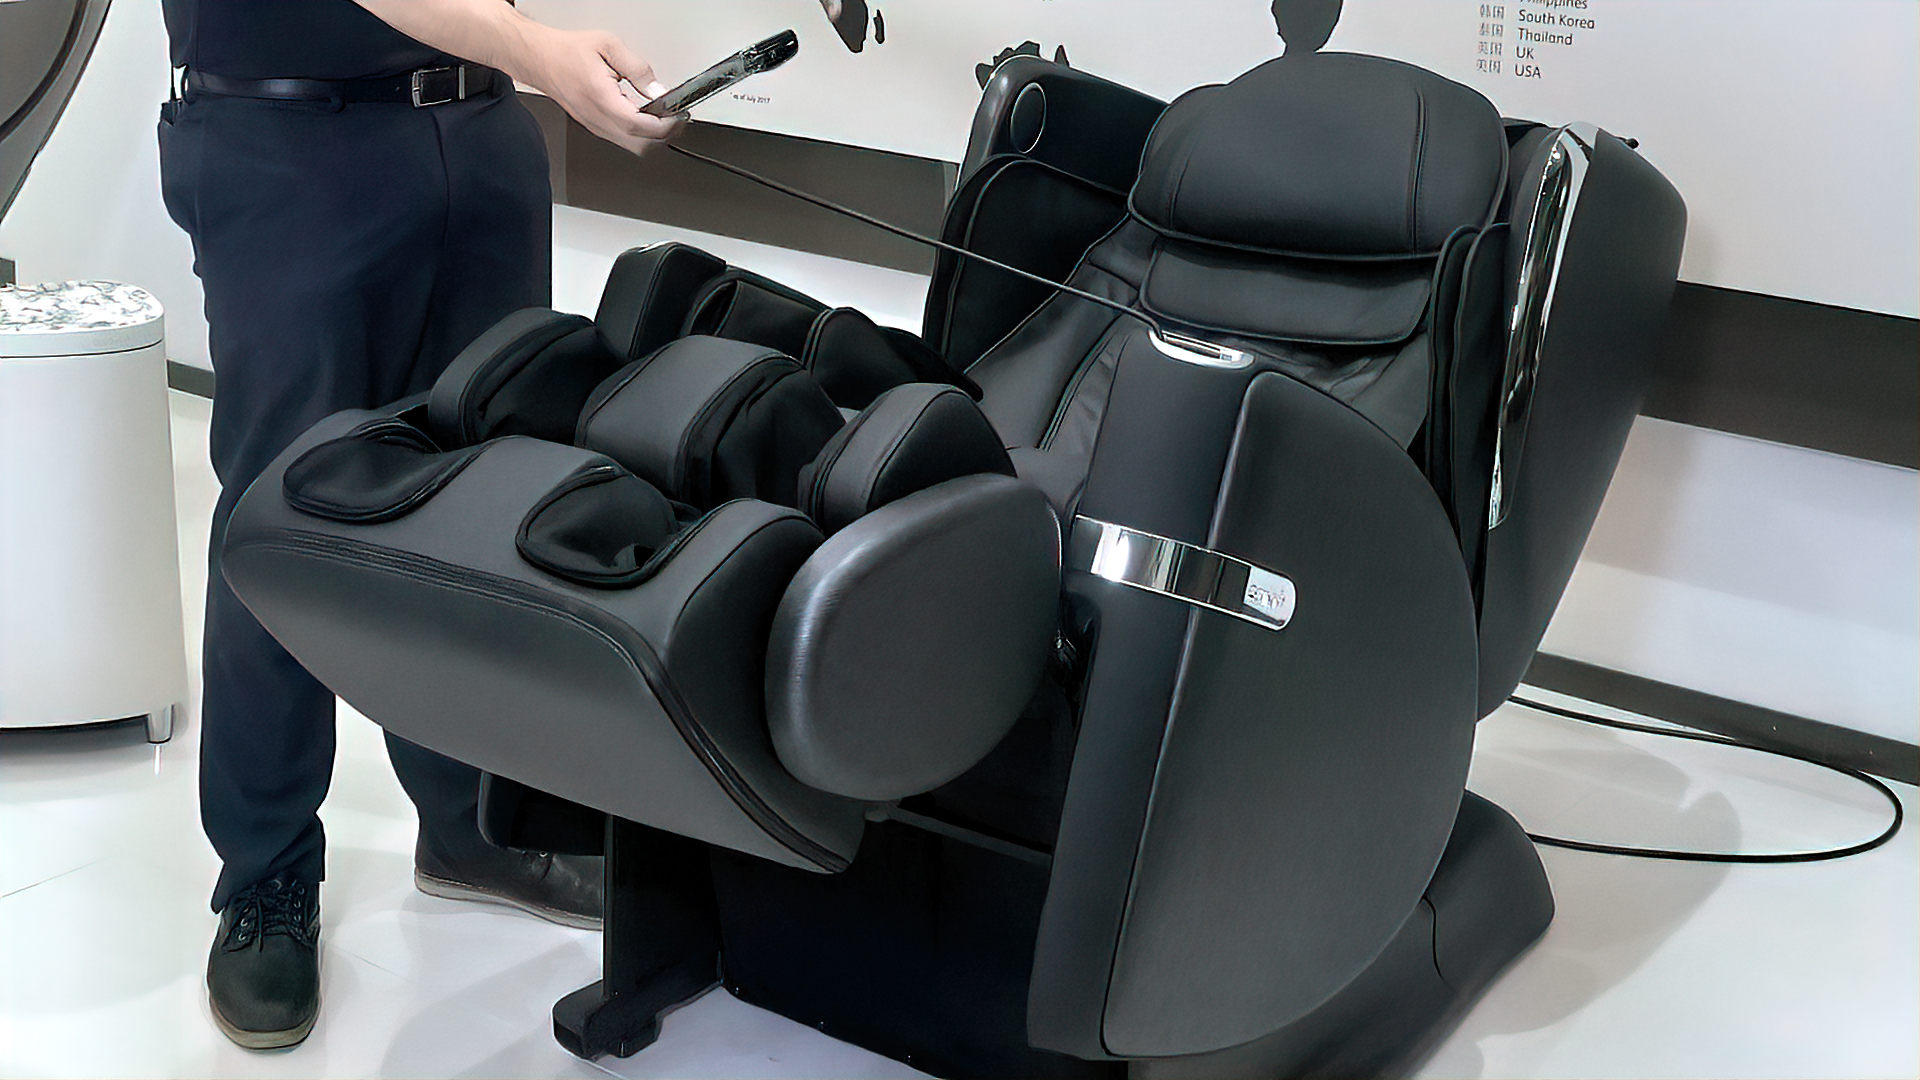 Full-Body Massage Chair - Marc and Mandy Show